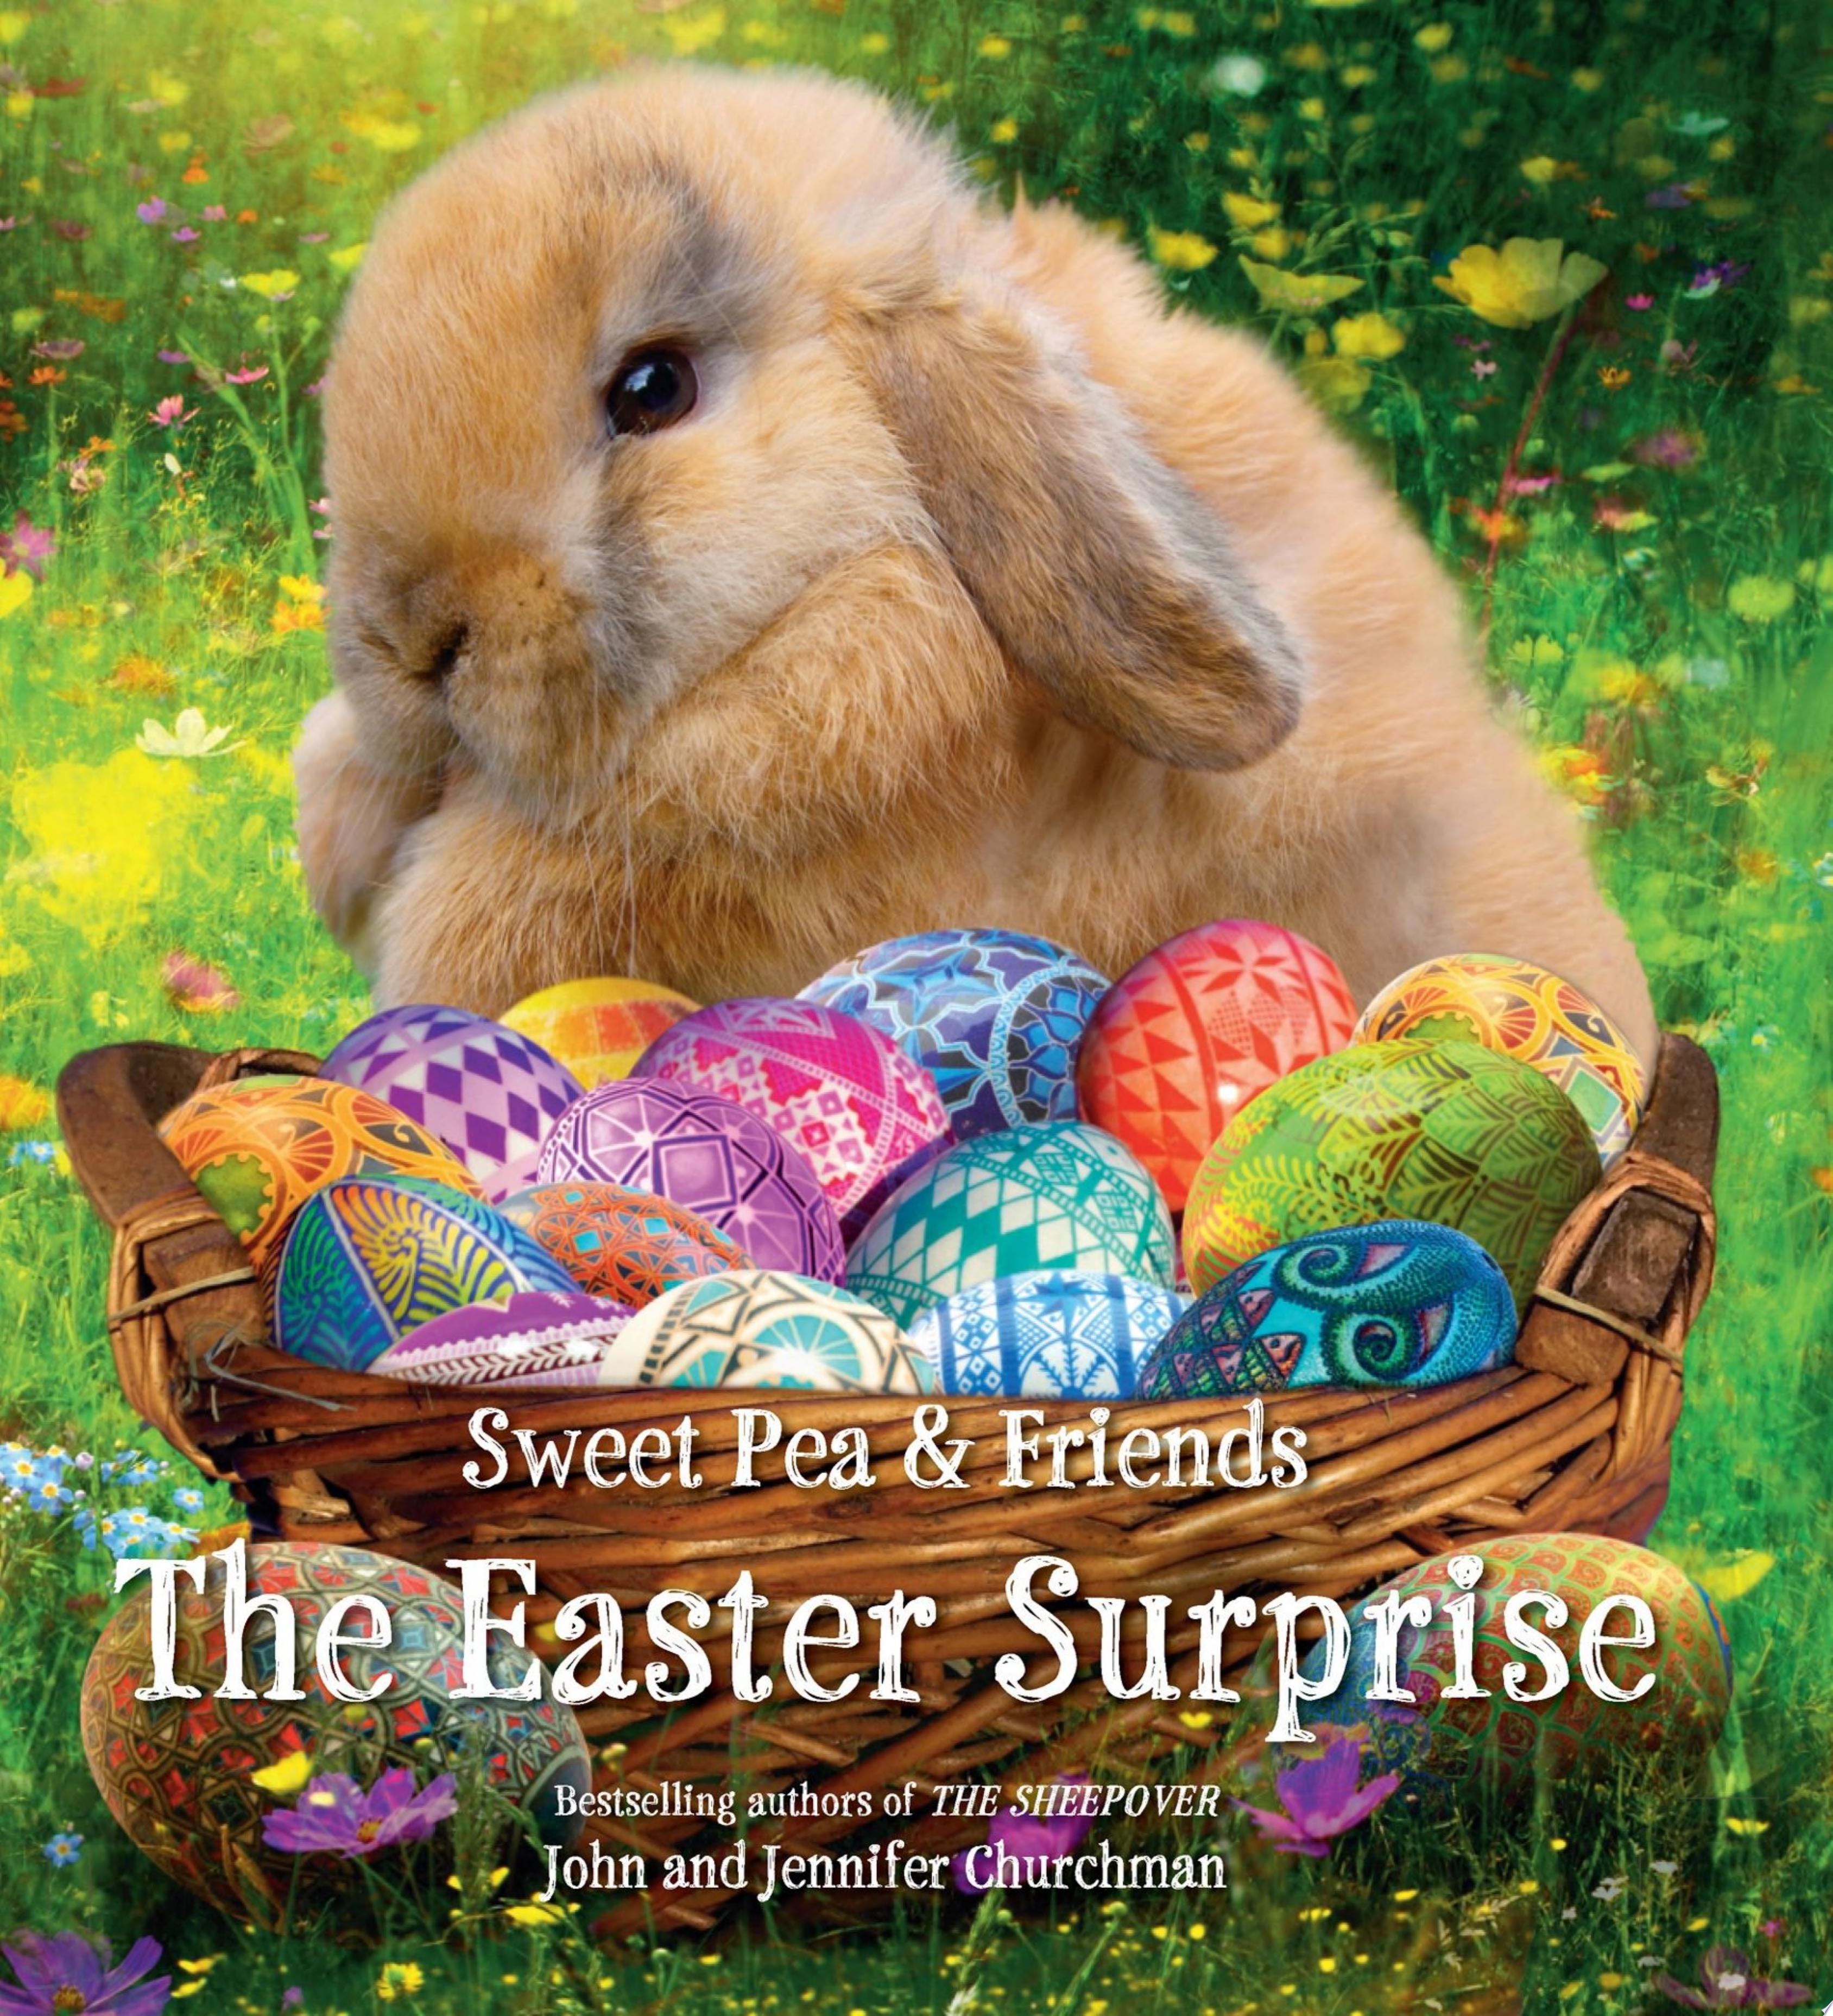 Image for "The Easter Surprise"